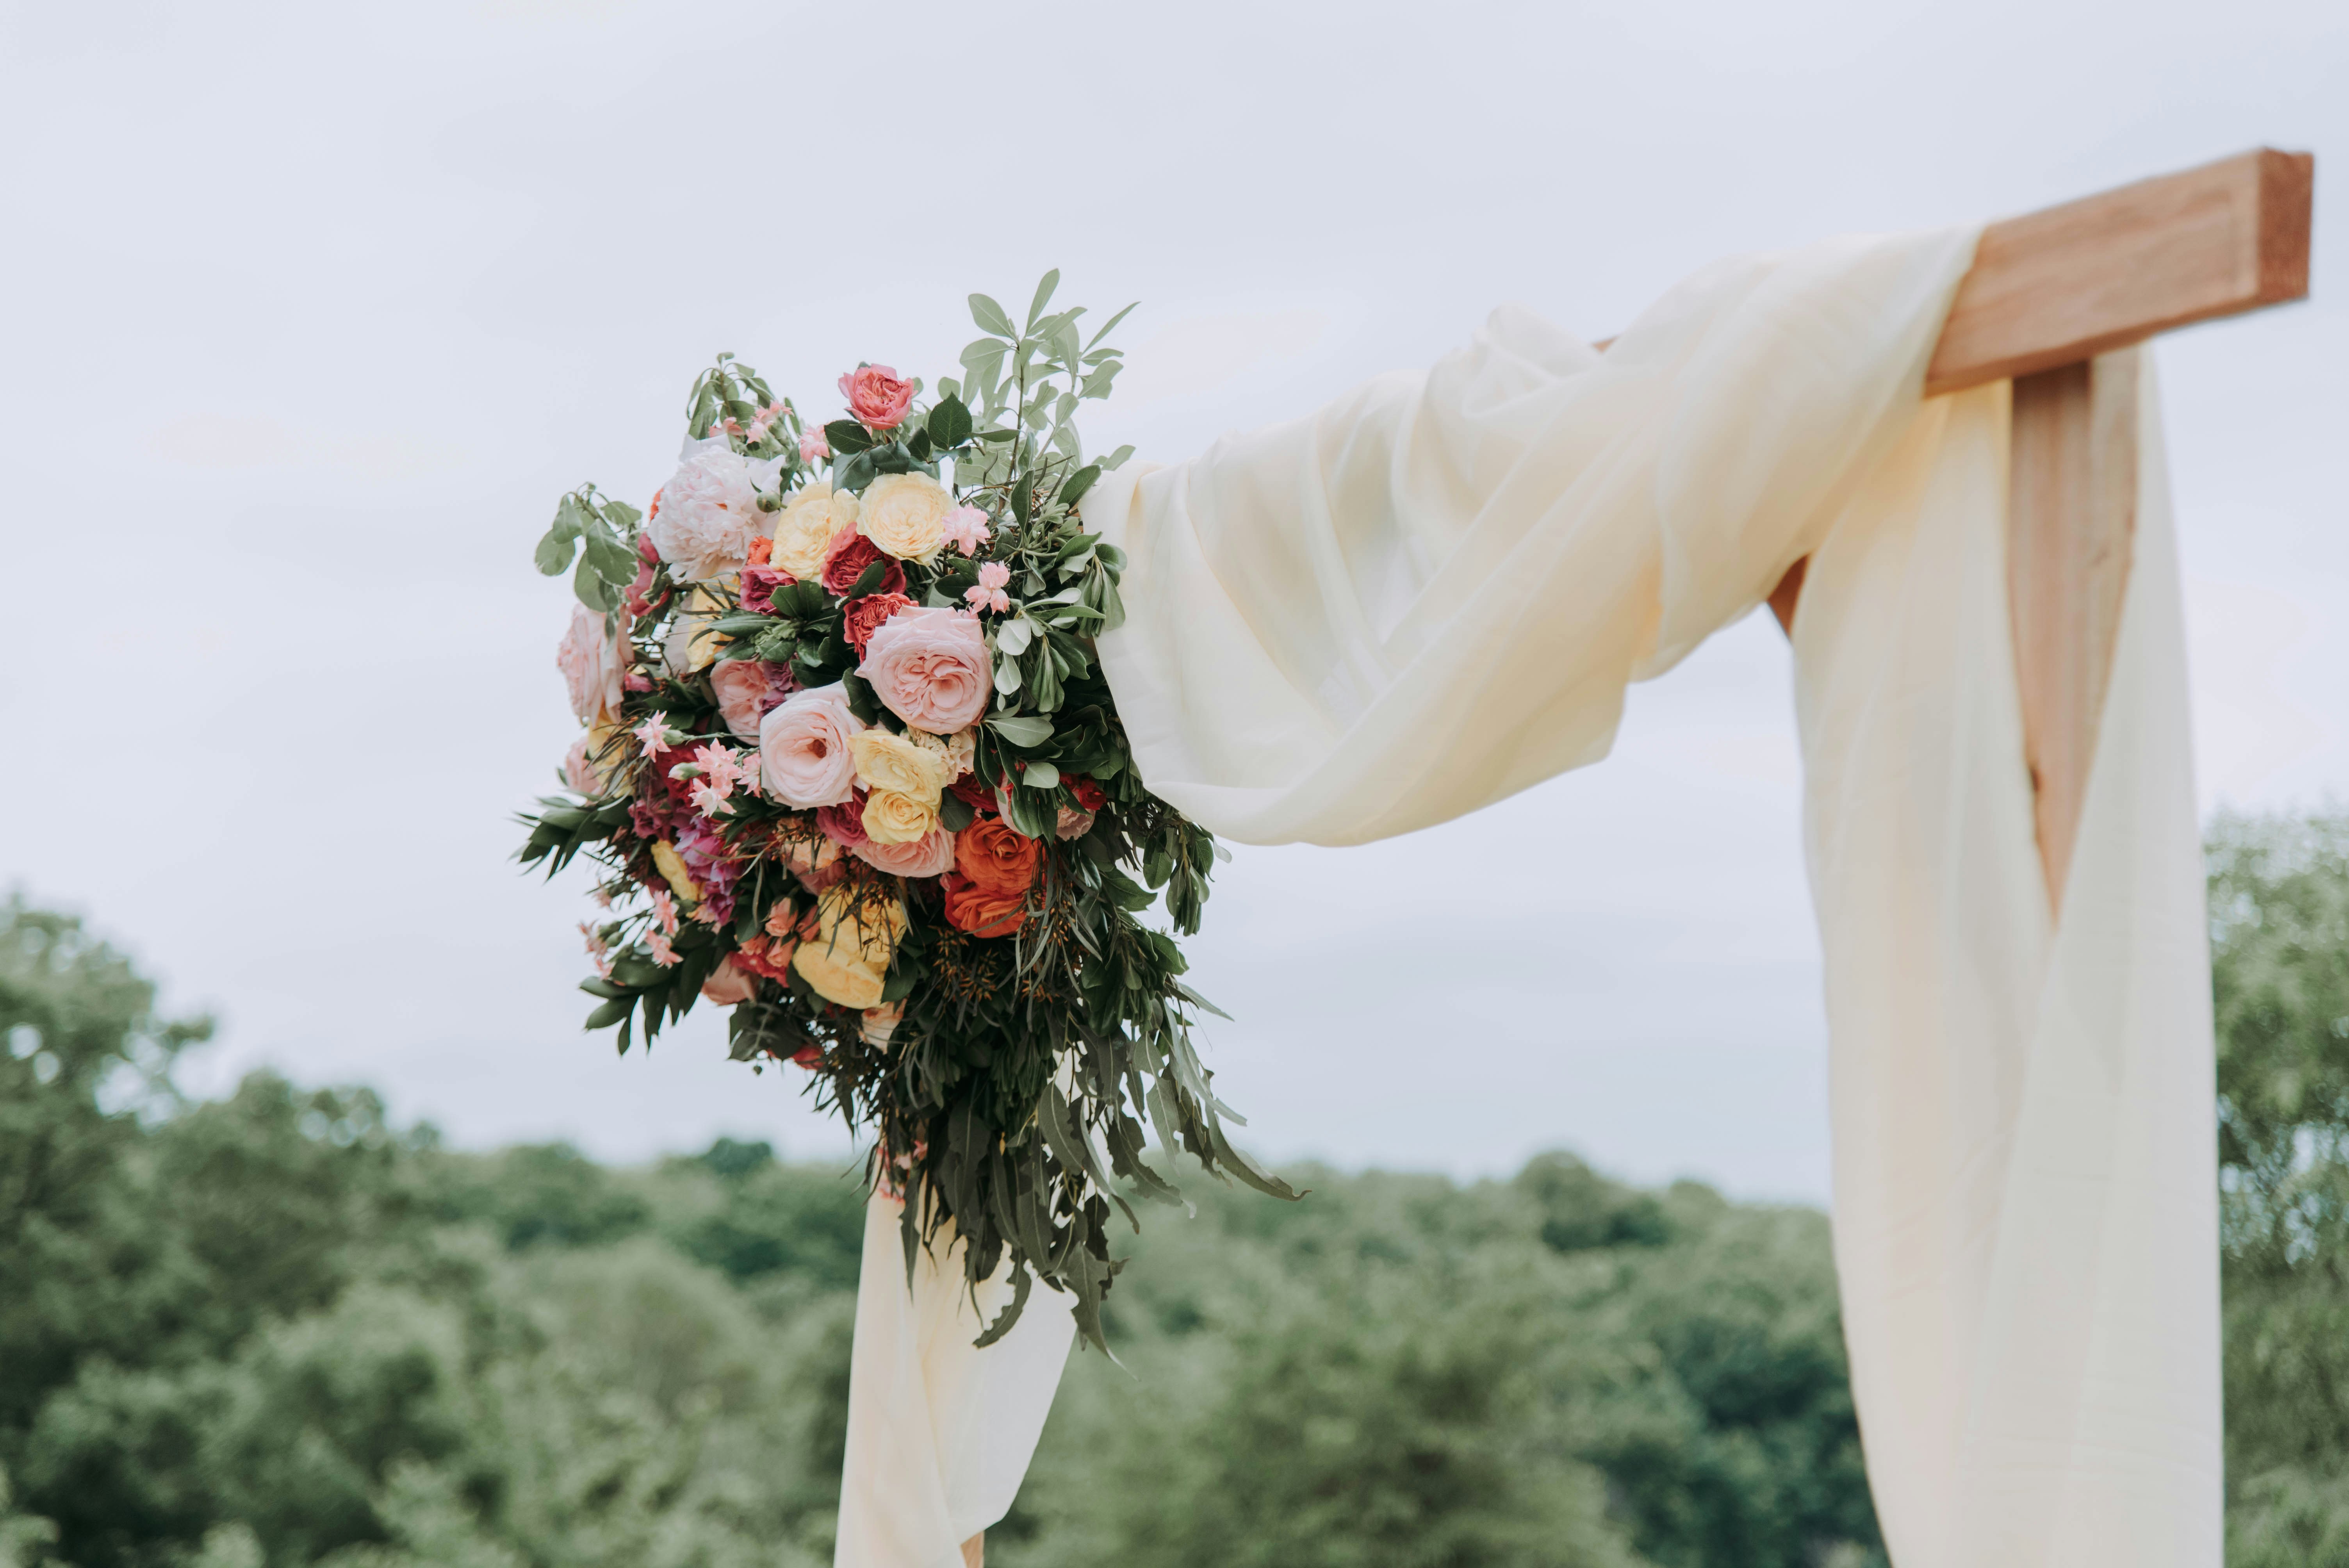 Creating Your Dream Wedding on a Budget